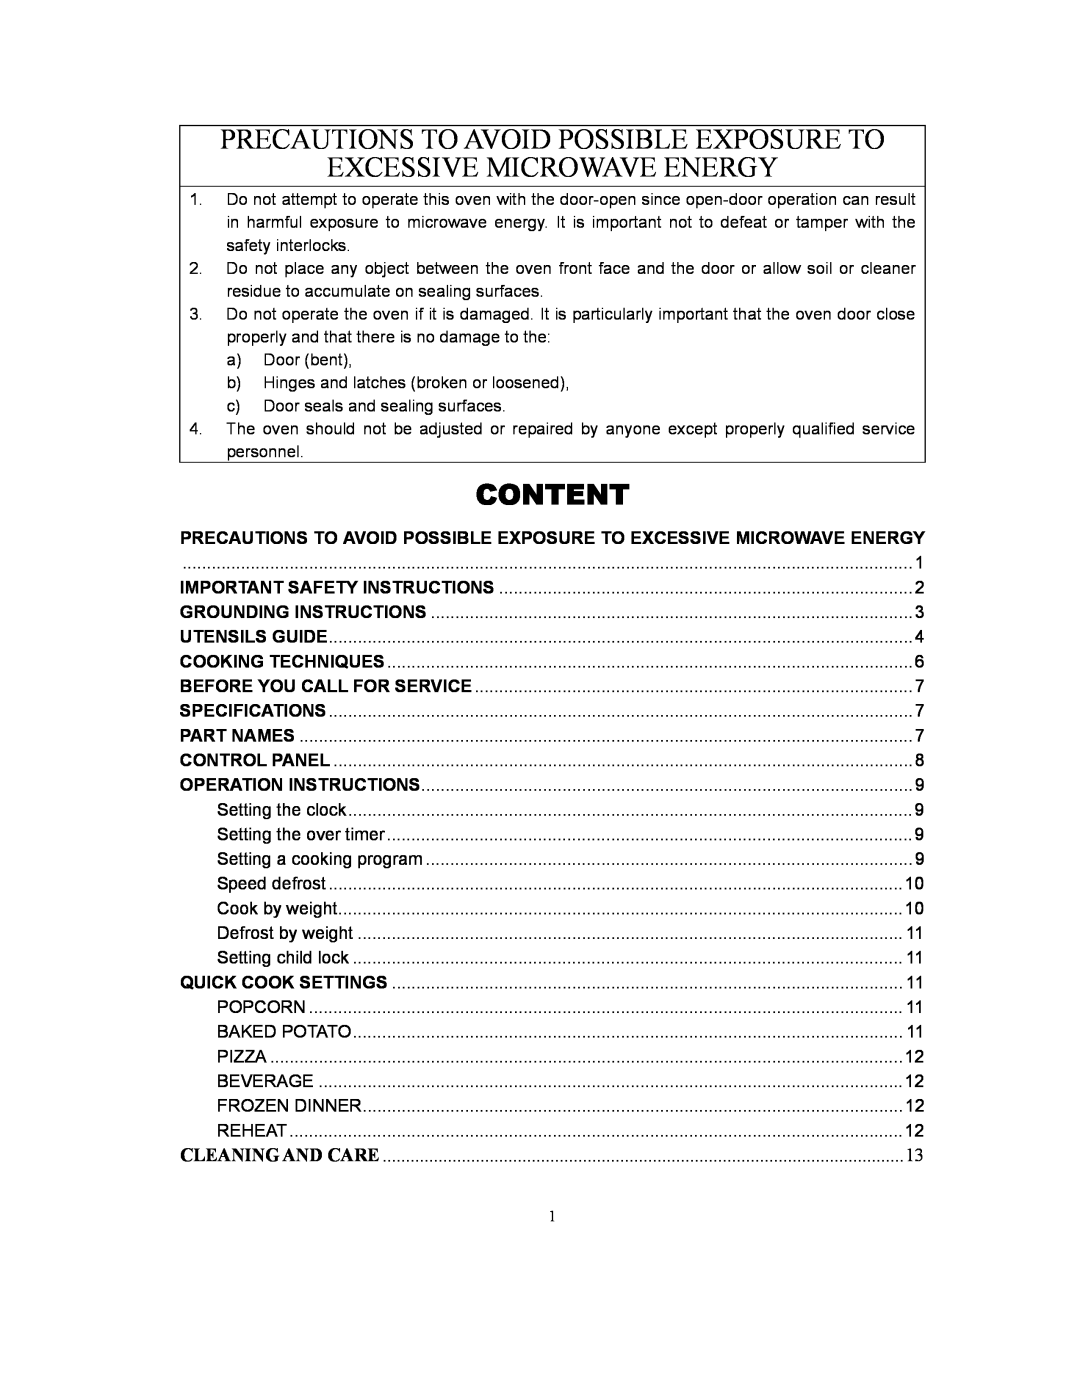 Kenmore 87032 owner manual Content, Precautions To Avoid Possible Exposure To, Excessive Microwave Energy 